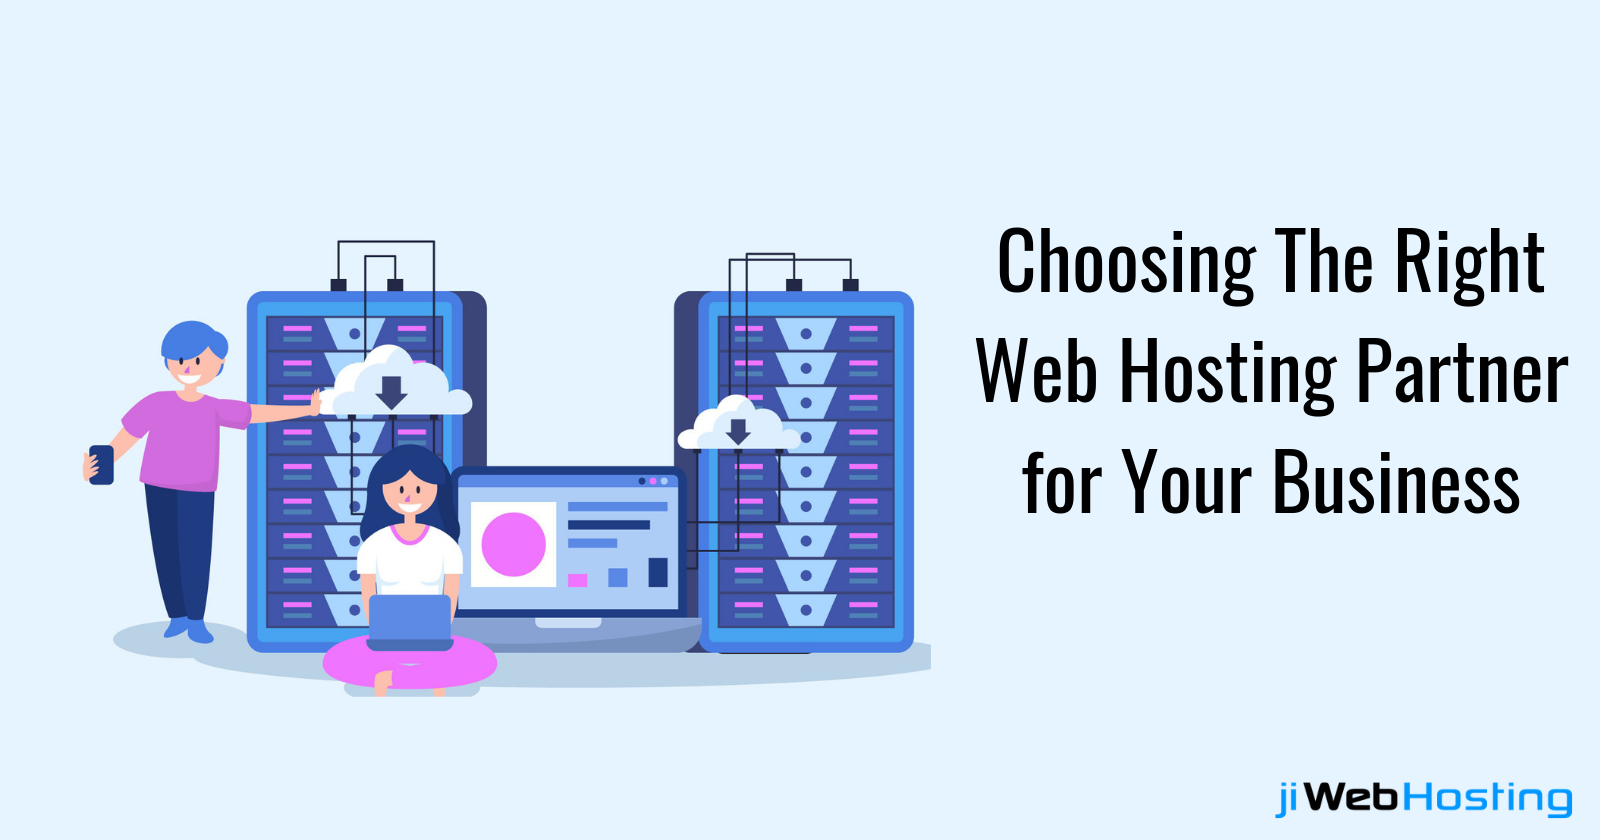 Why Is It Important To Choose The Right Web Hosting Partner